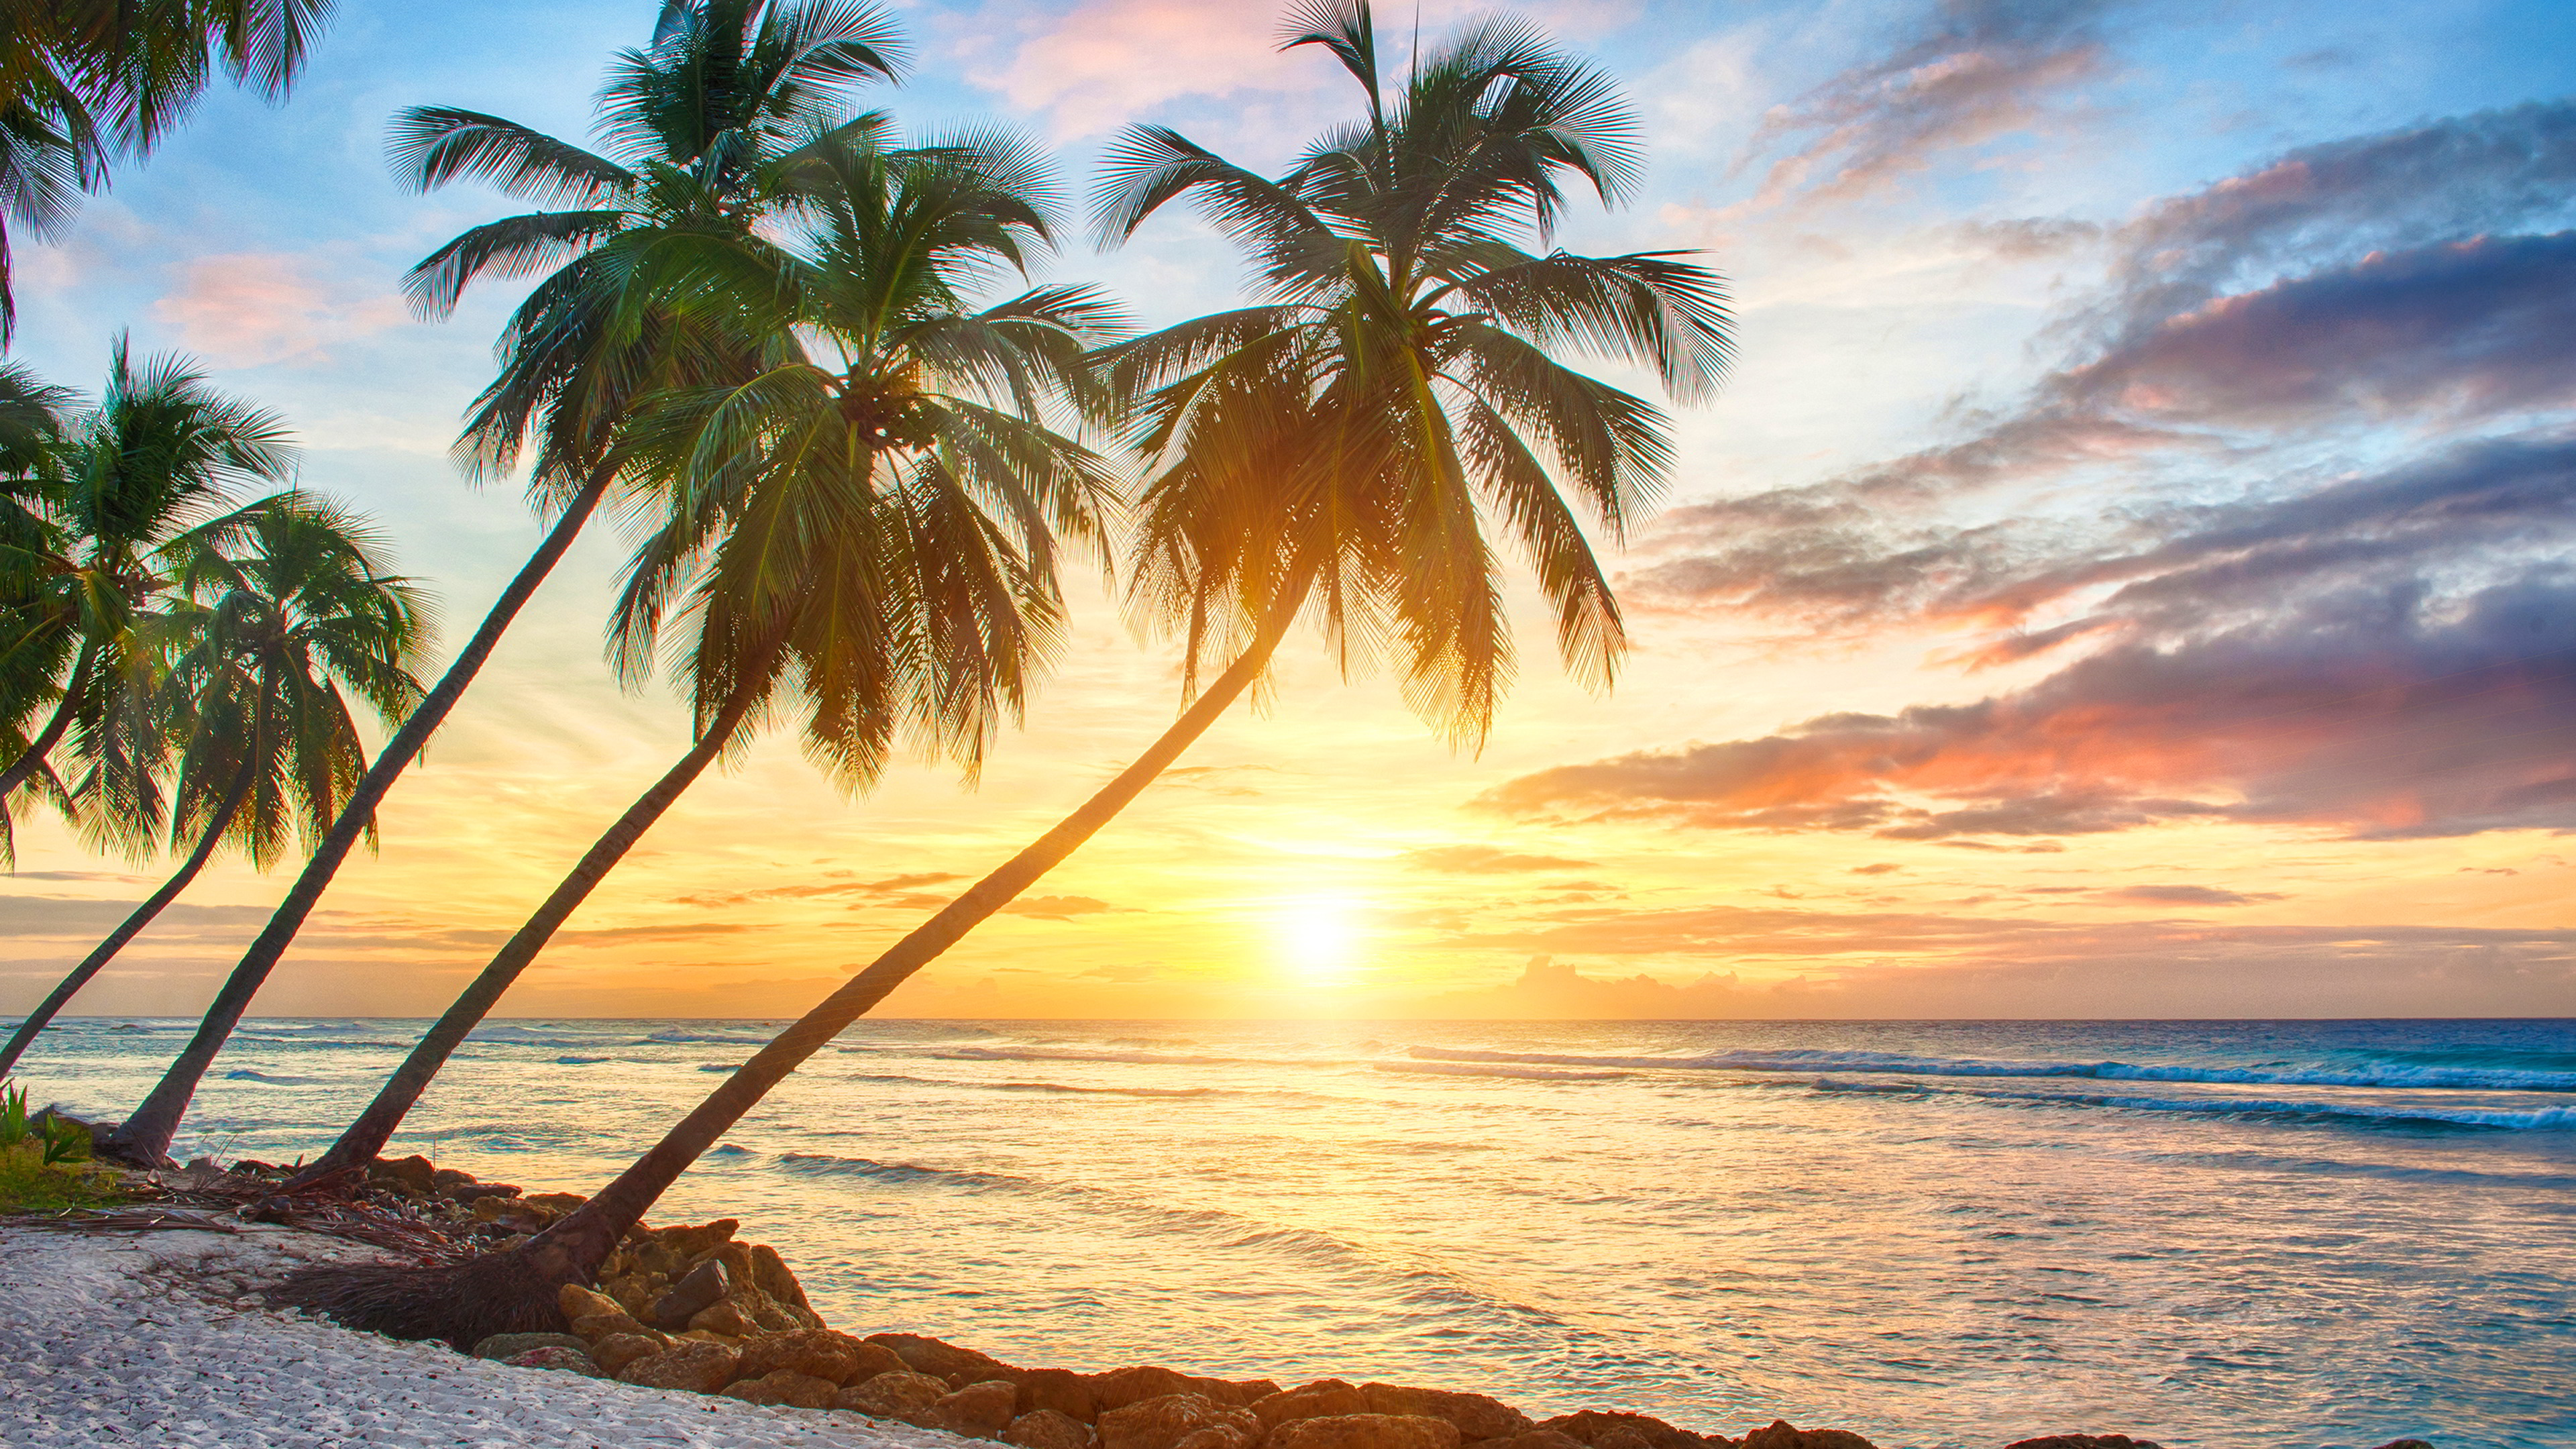 Tropical Backgrounds, Stunning Tropical, 3840x2160, #9266